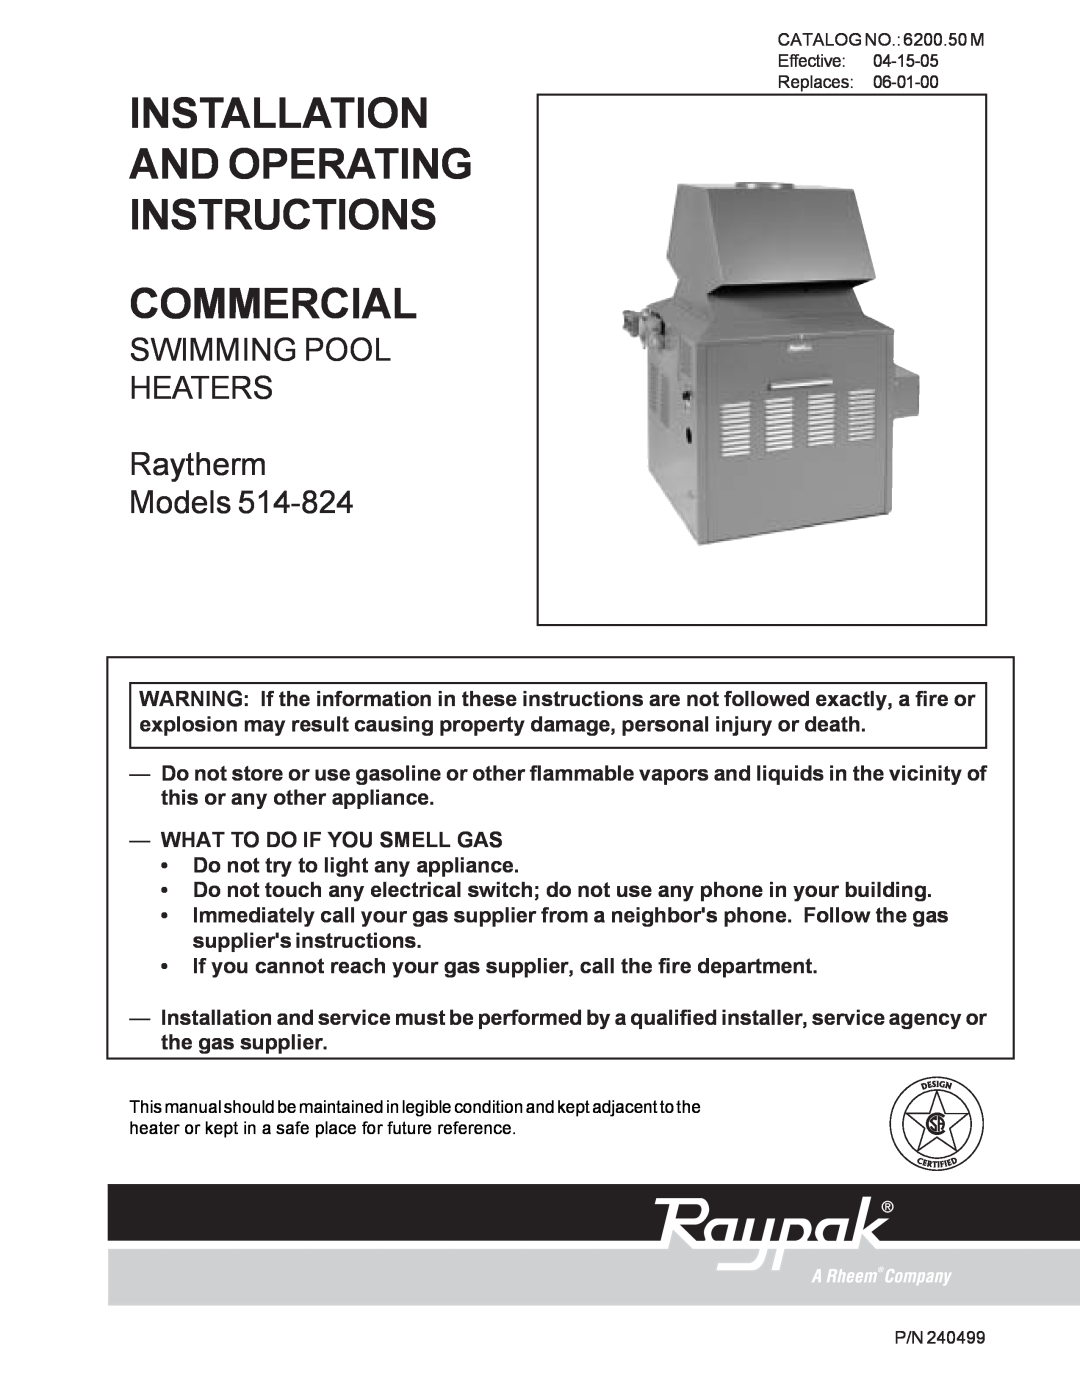 Raypak 514-824 manual SWIMMING POOL HEATERS Raytherm Models, Installation And Operating Instructions, Commercial 